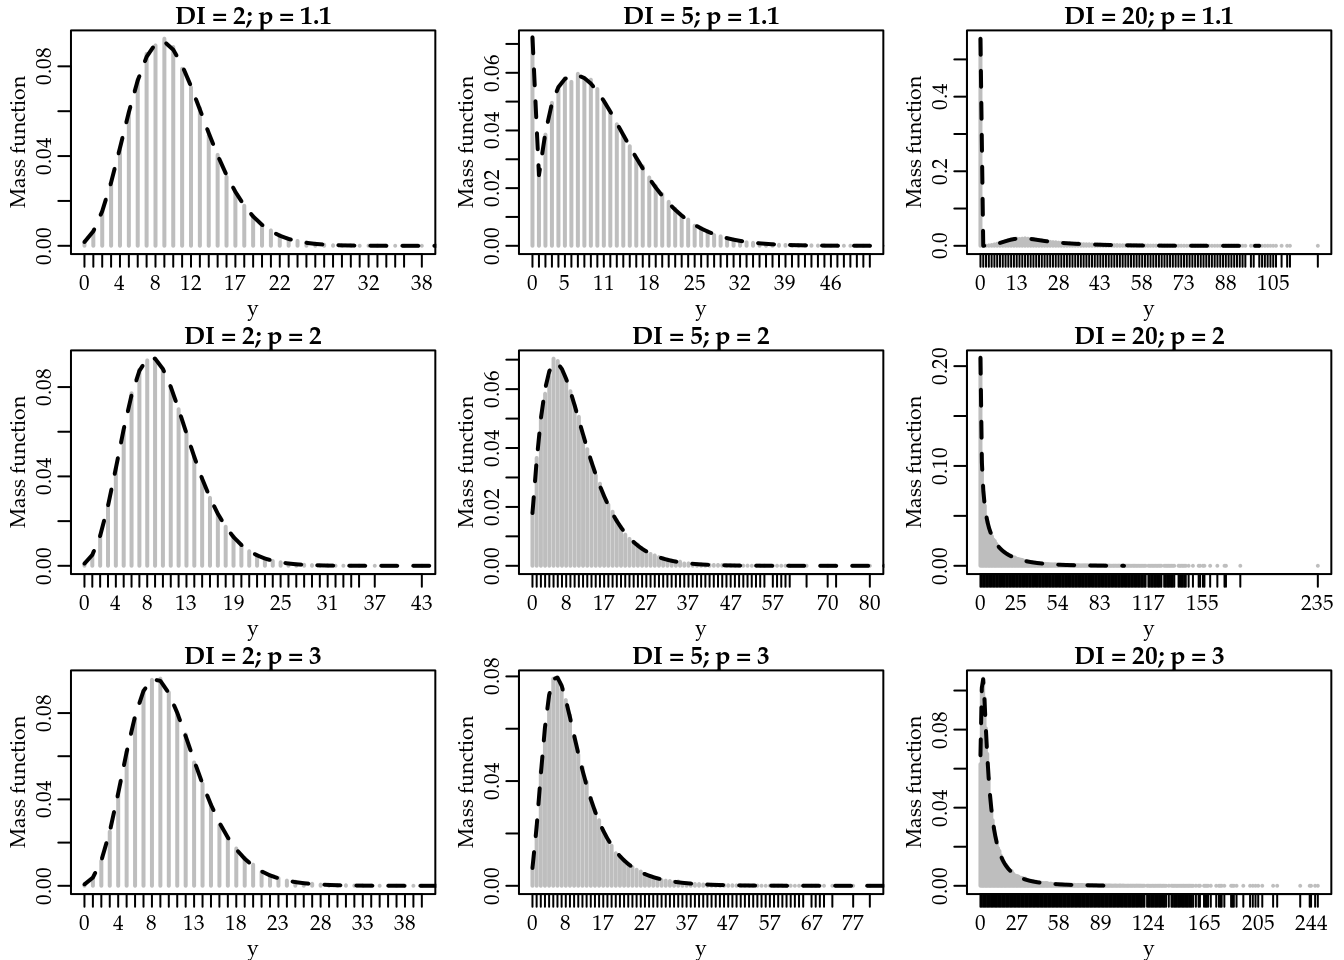 Empirical (gray) and approximated (black) Poisson-Tweedie probability mass function by values of the dispersion index (DI) and Tweedie power parameter.